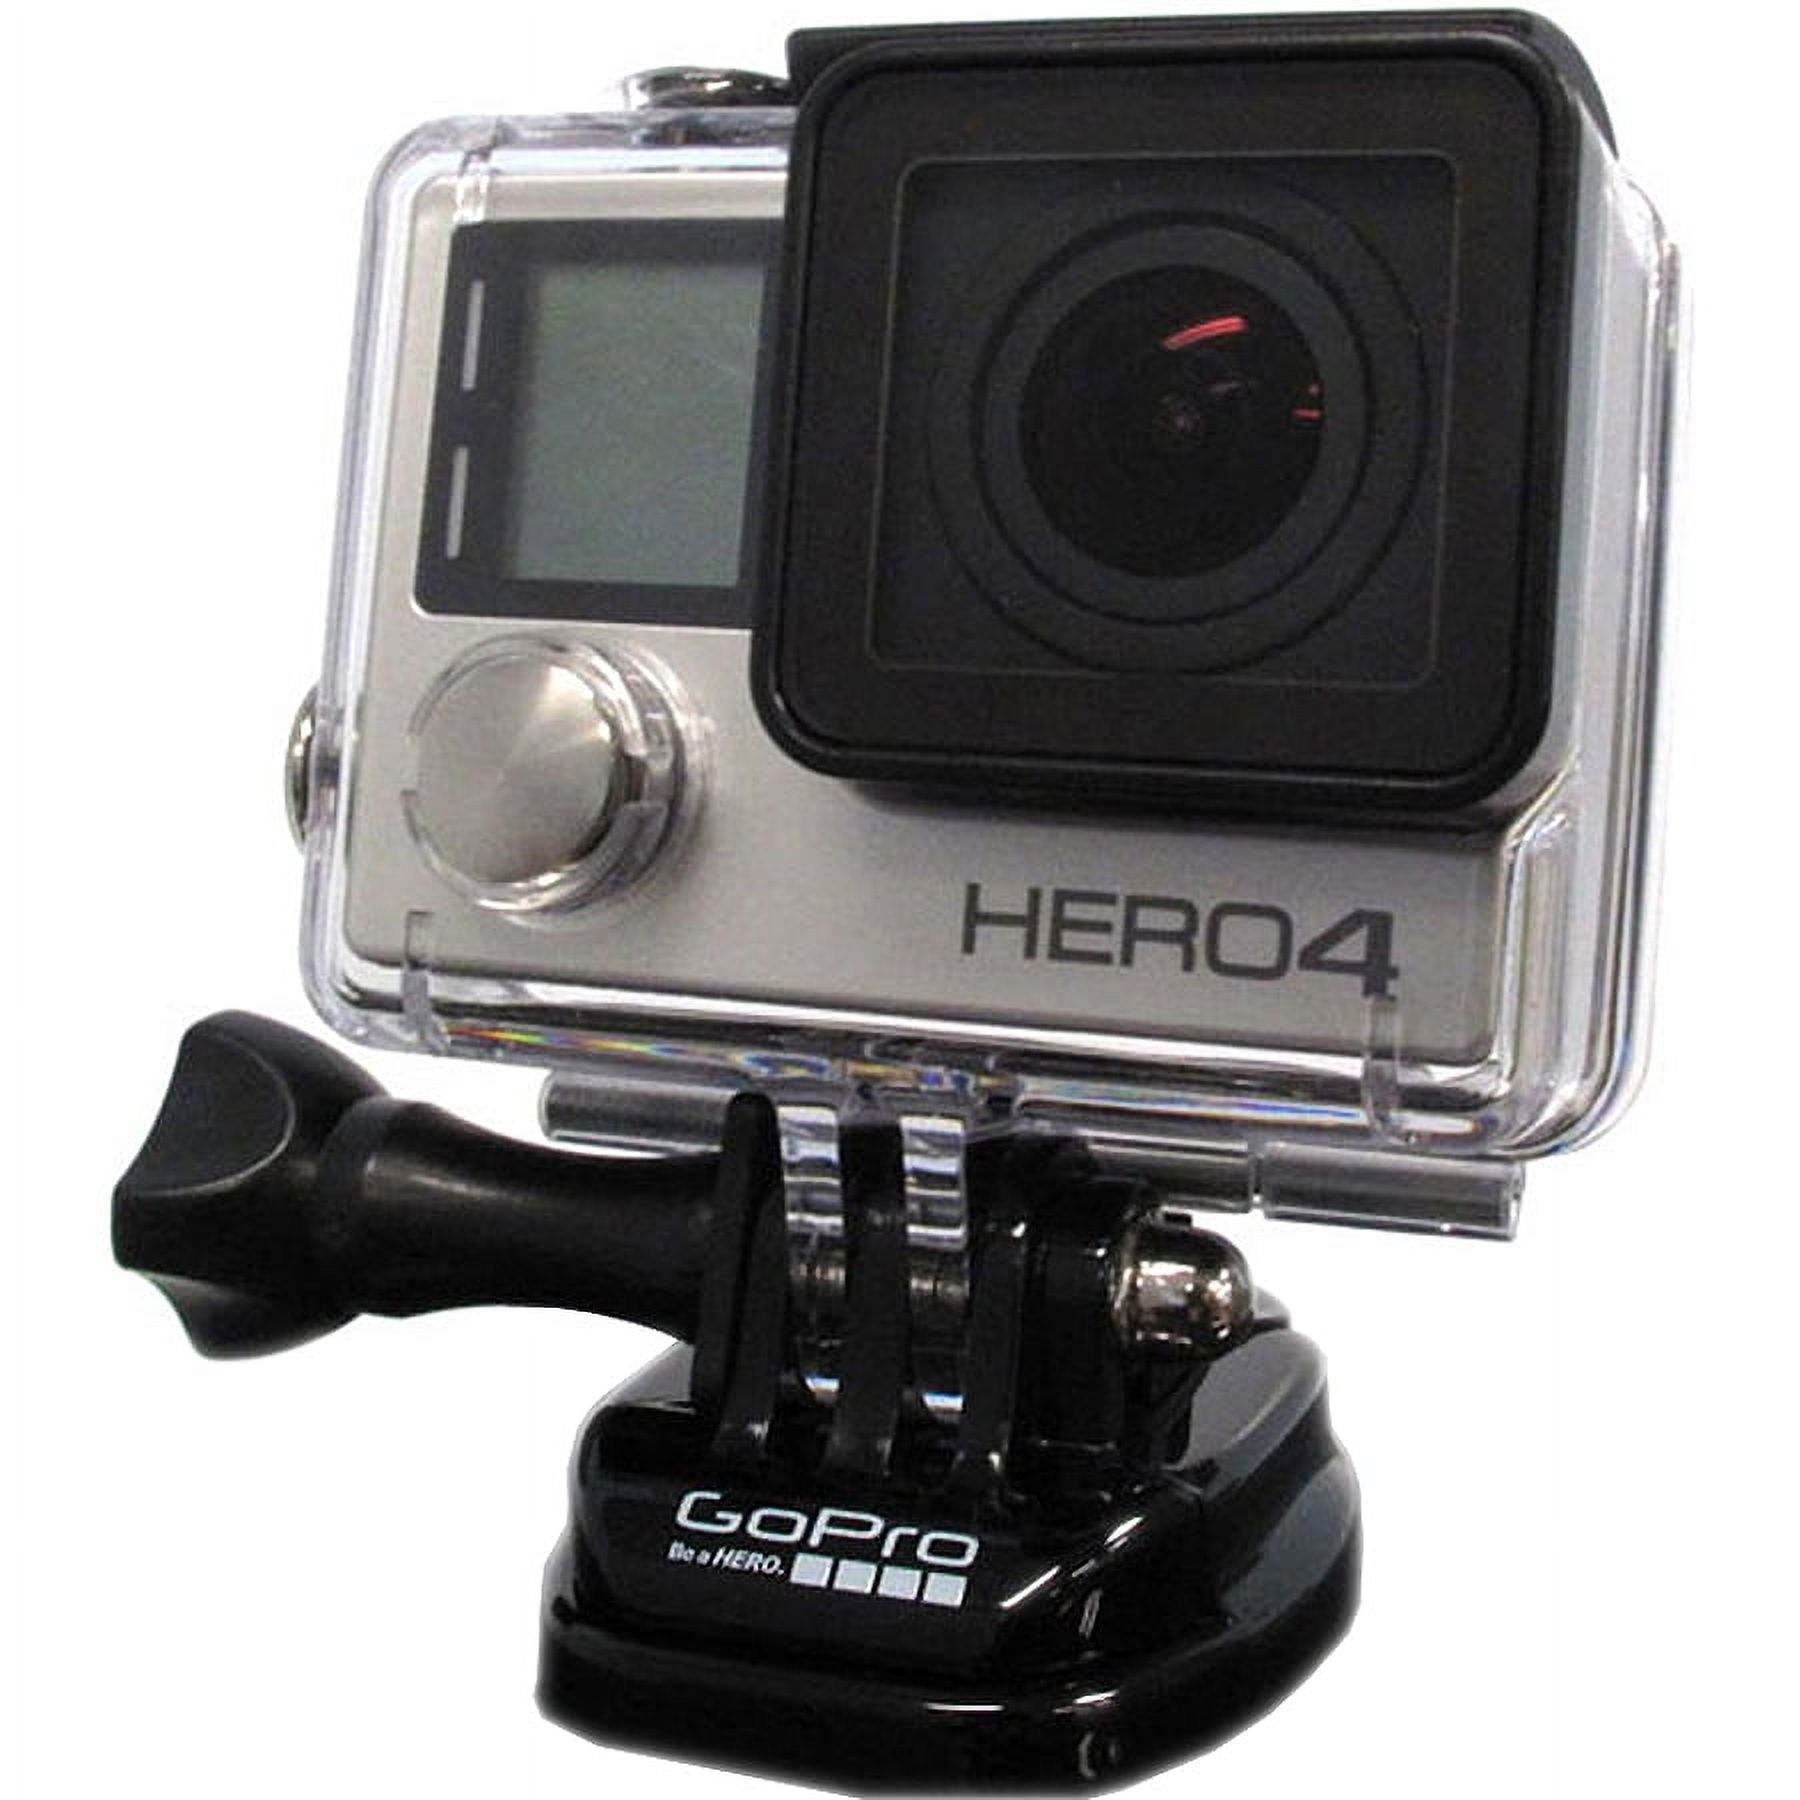 GoPro HERO4 - Silver Edition - action camera - mountable - 1080p - 12.0 MP - Wi-Fi, Bluetooth - underwater up to 131.2 ft - image 1 of 8